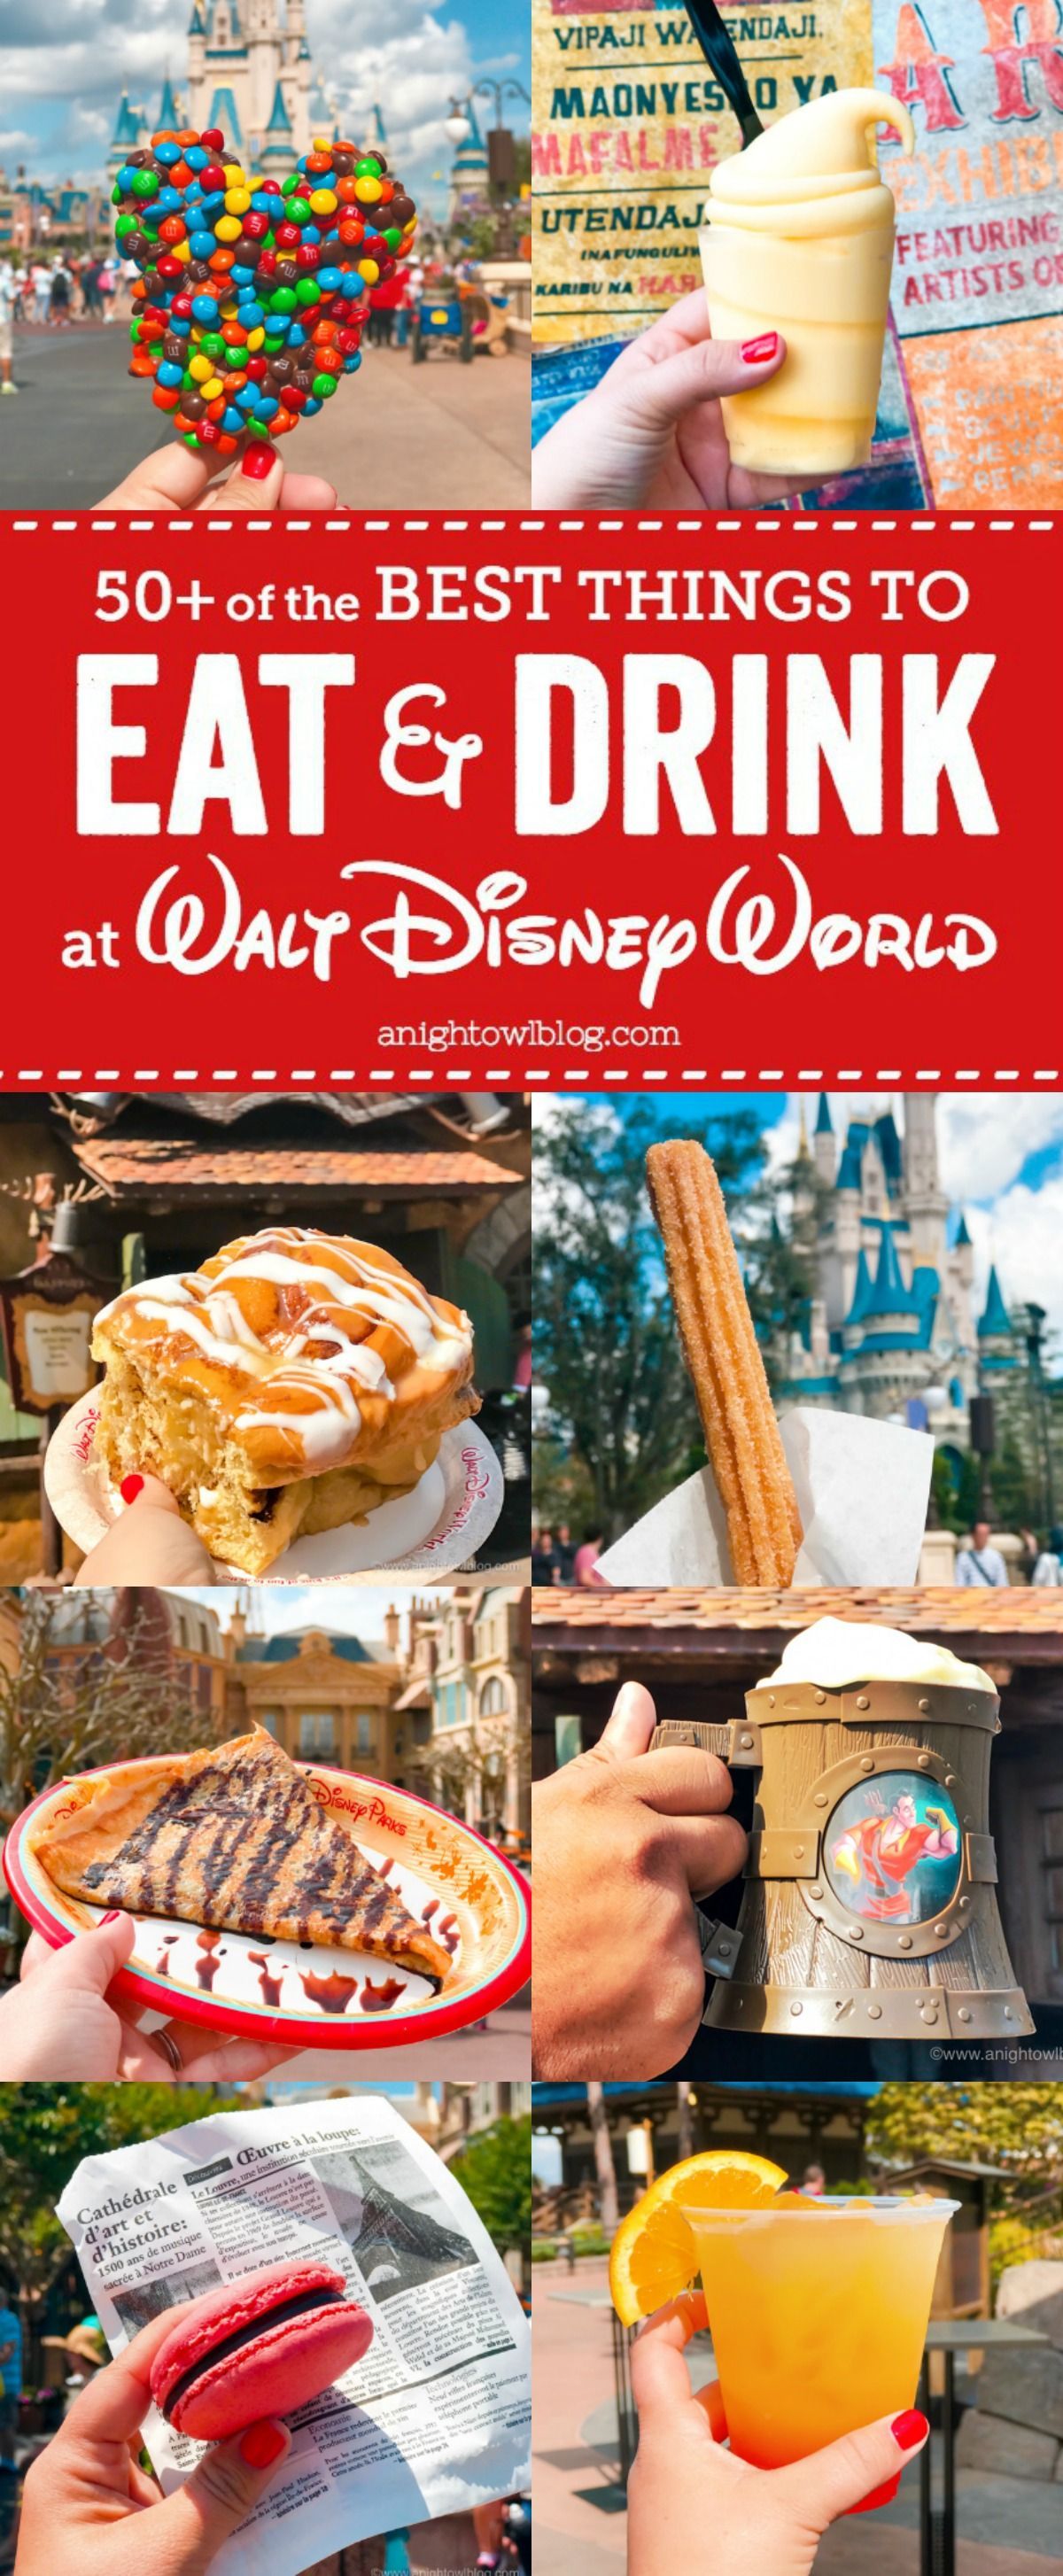 50+ of the Best Things to Eat and Drink at Walt Disney World -   Disney World Tips and Hacks Collection